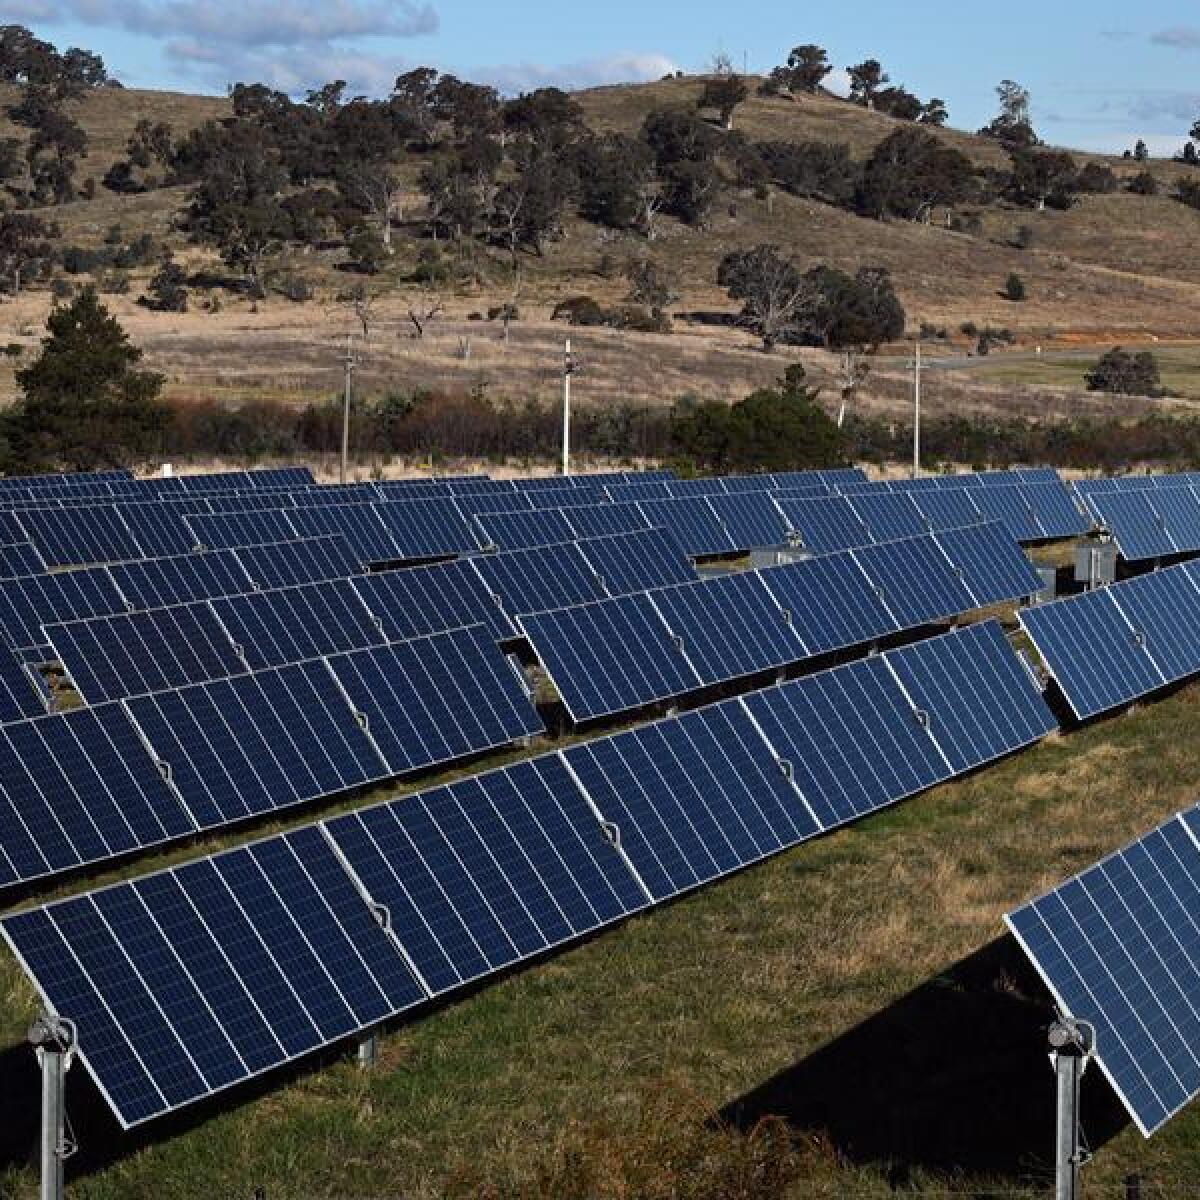 Solar panels at a solar farm on the northern outskirts of Canberra